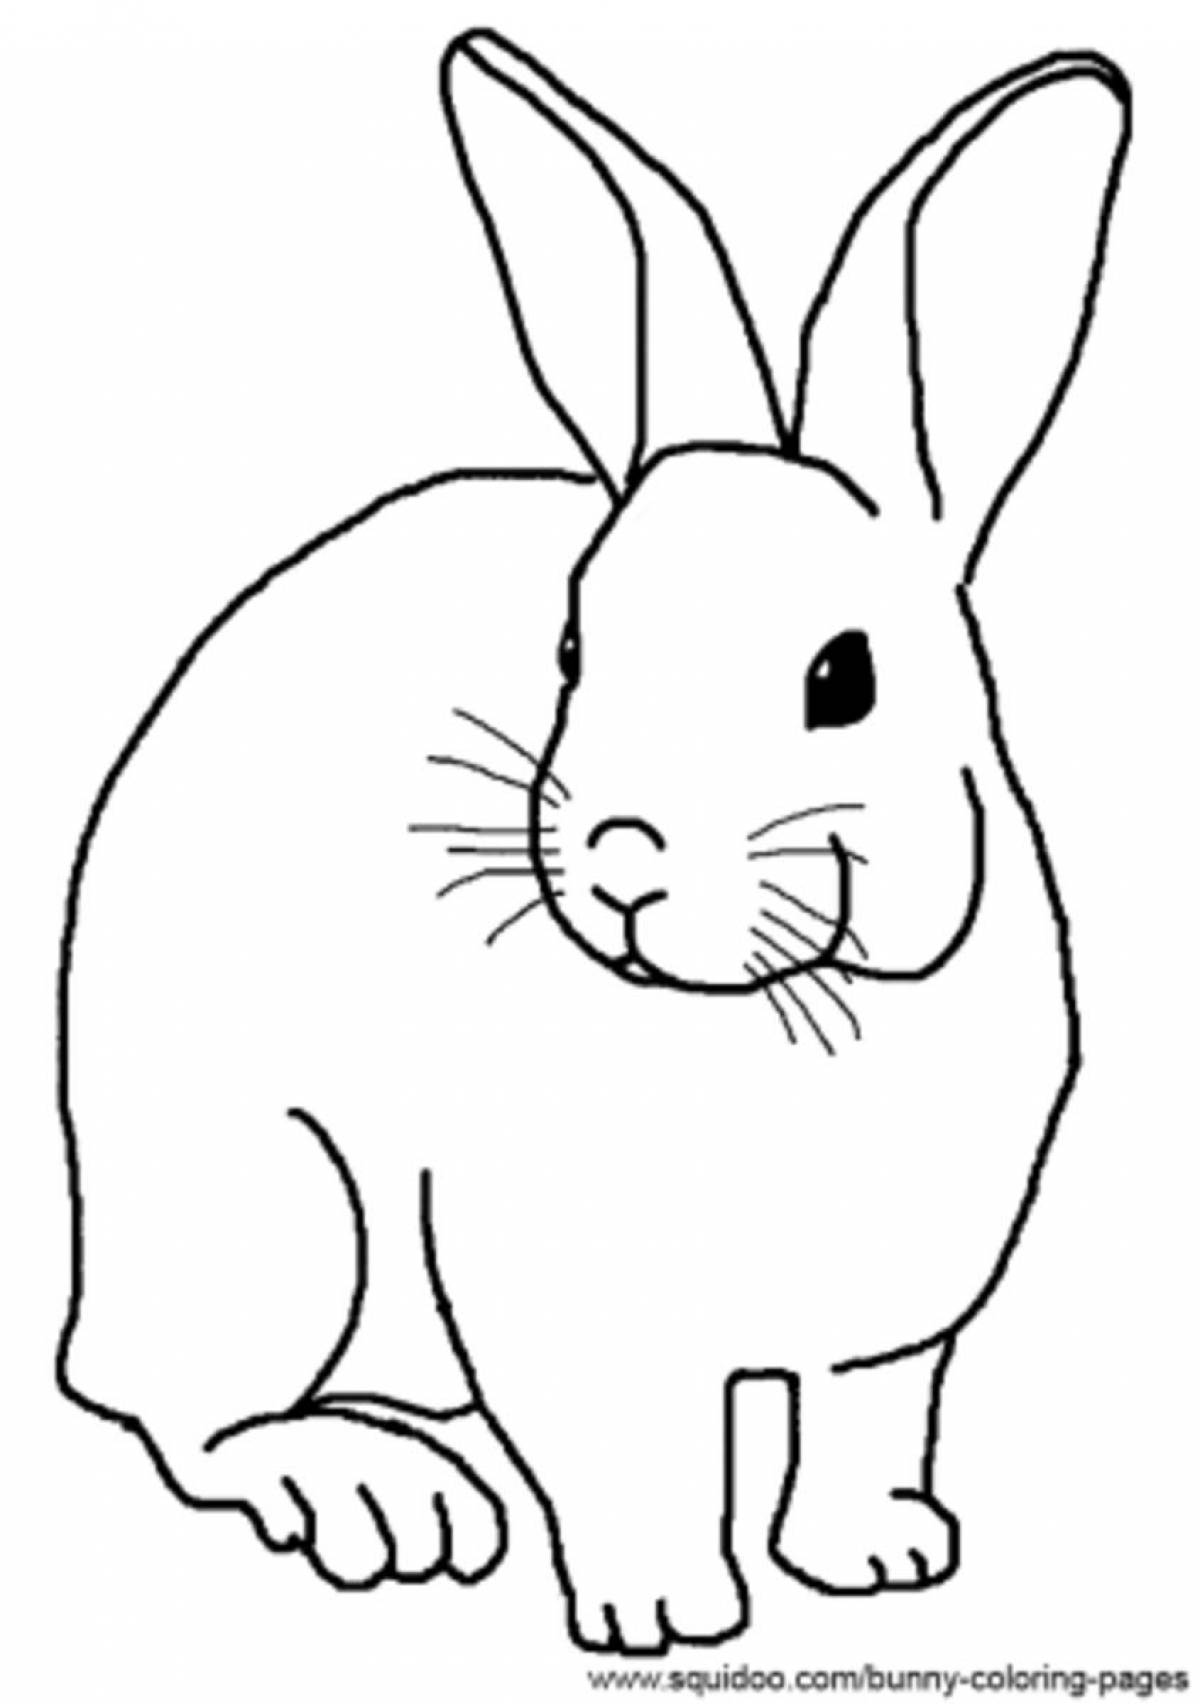 Coloring book rabbit on a floppy disk for children